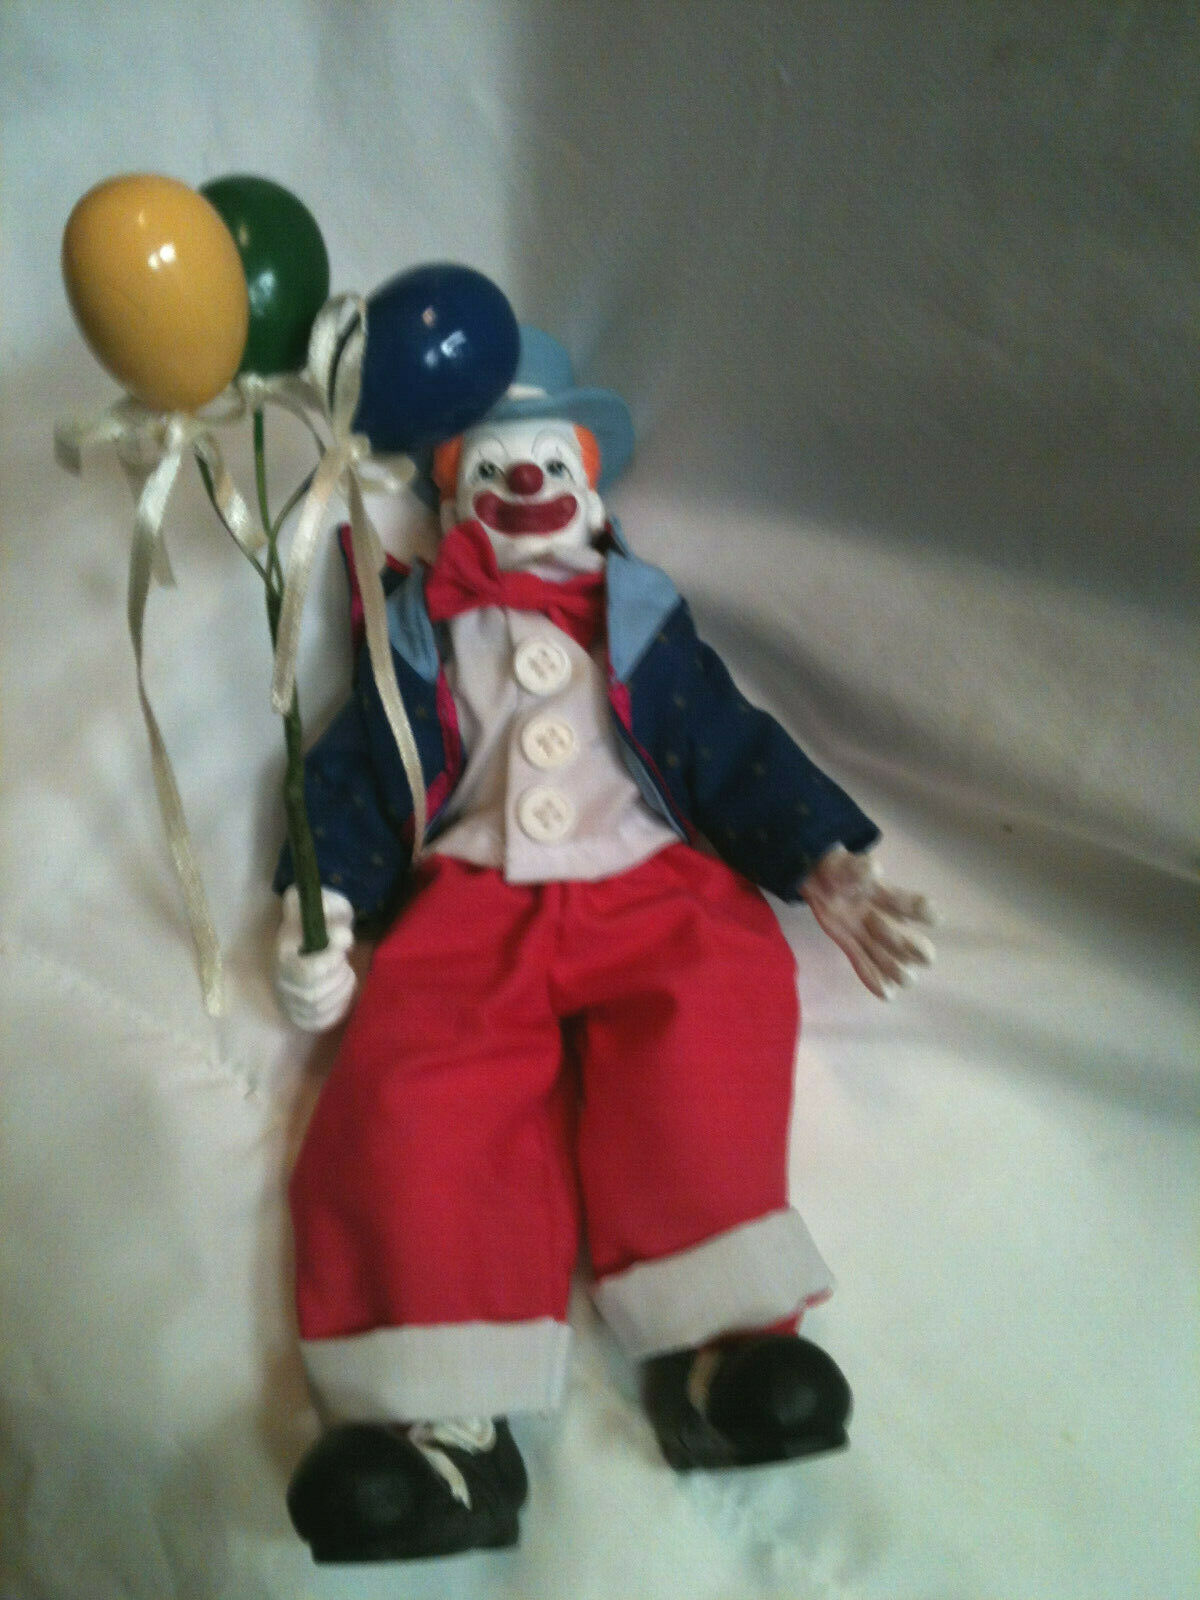 Vintage Porcelain/ceramic Clown Doll With Balloon Jointed Body 8" Tall Standing